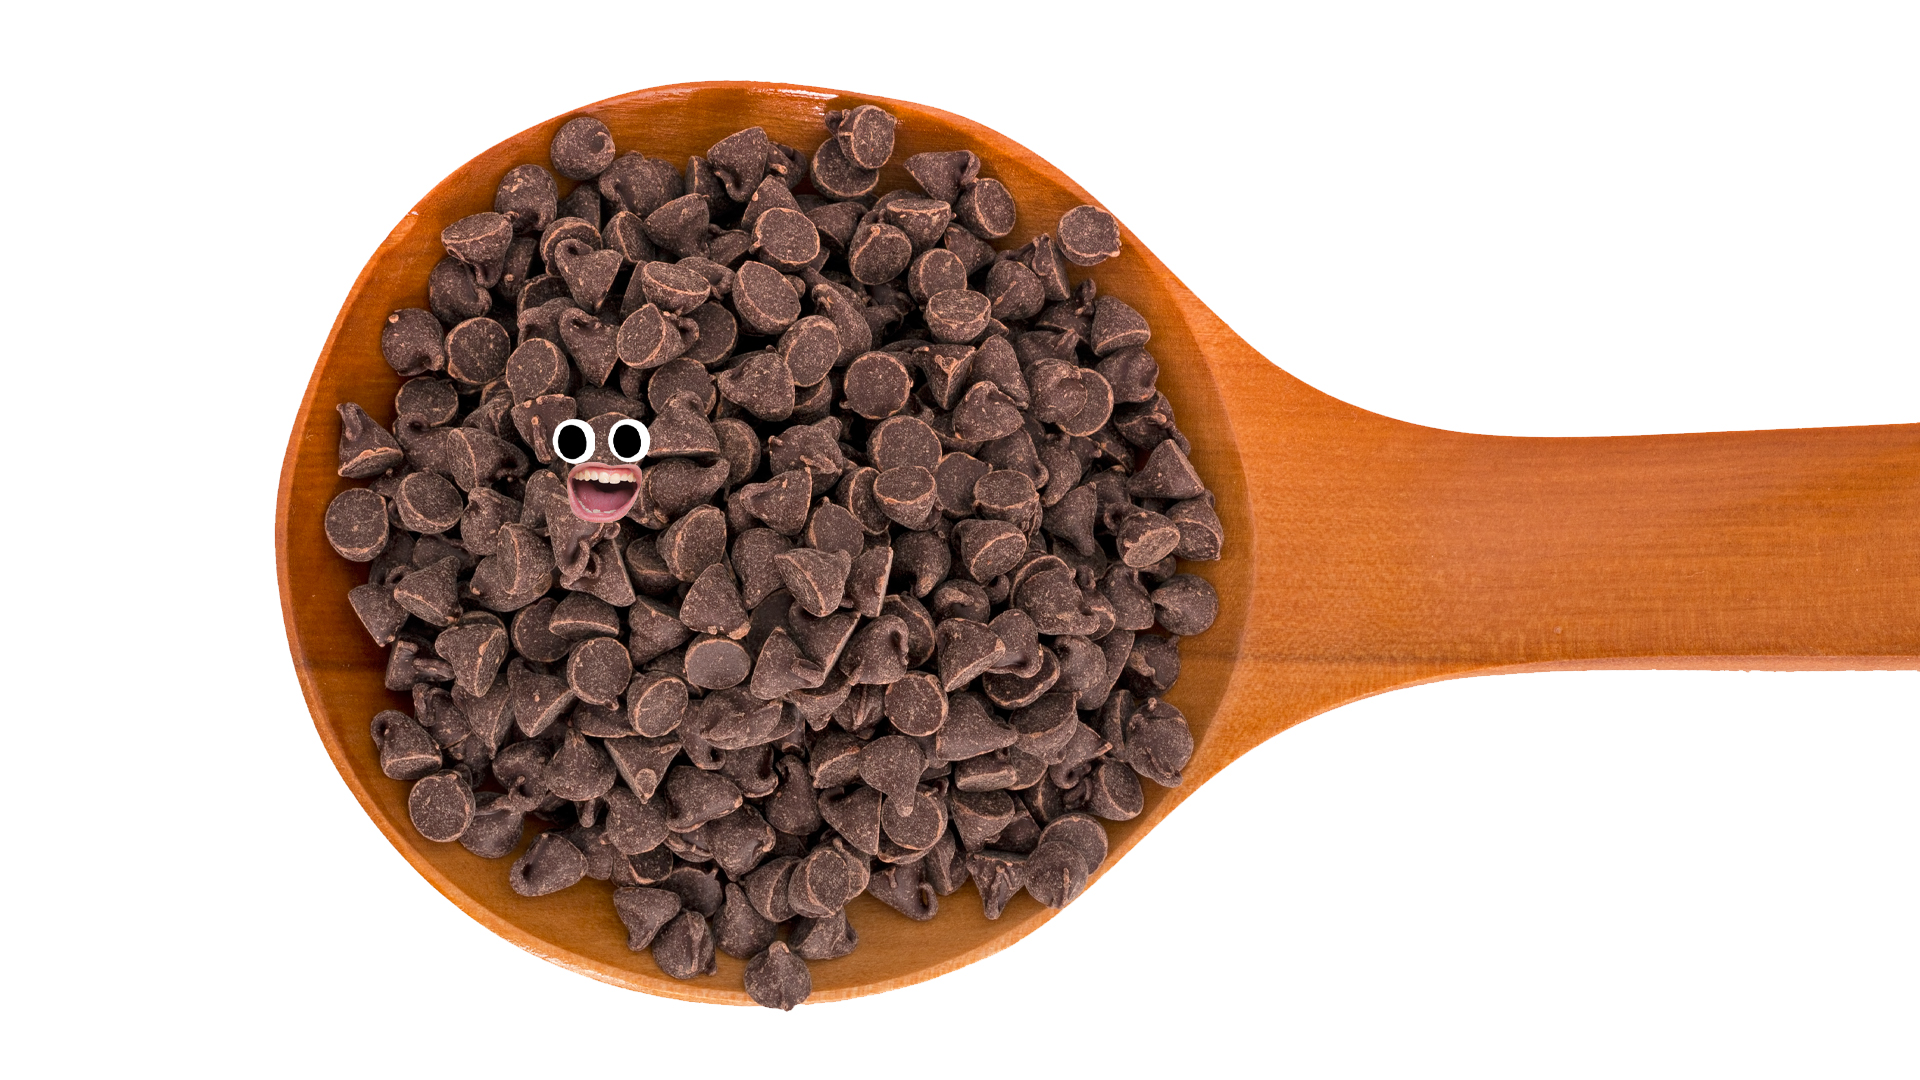 A wooden spoon full of choc chips